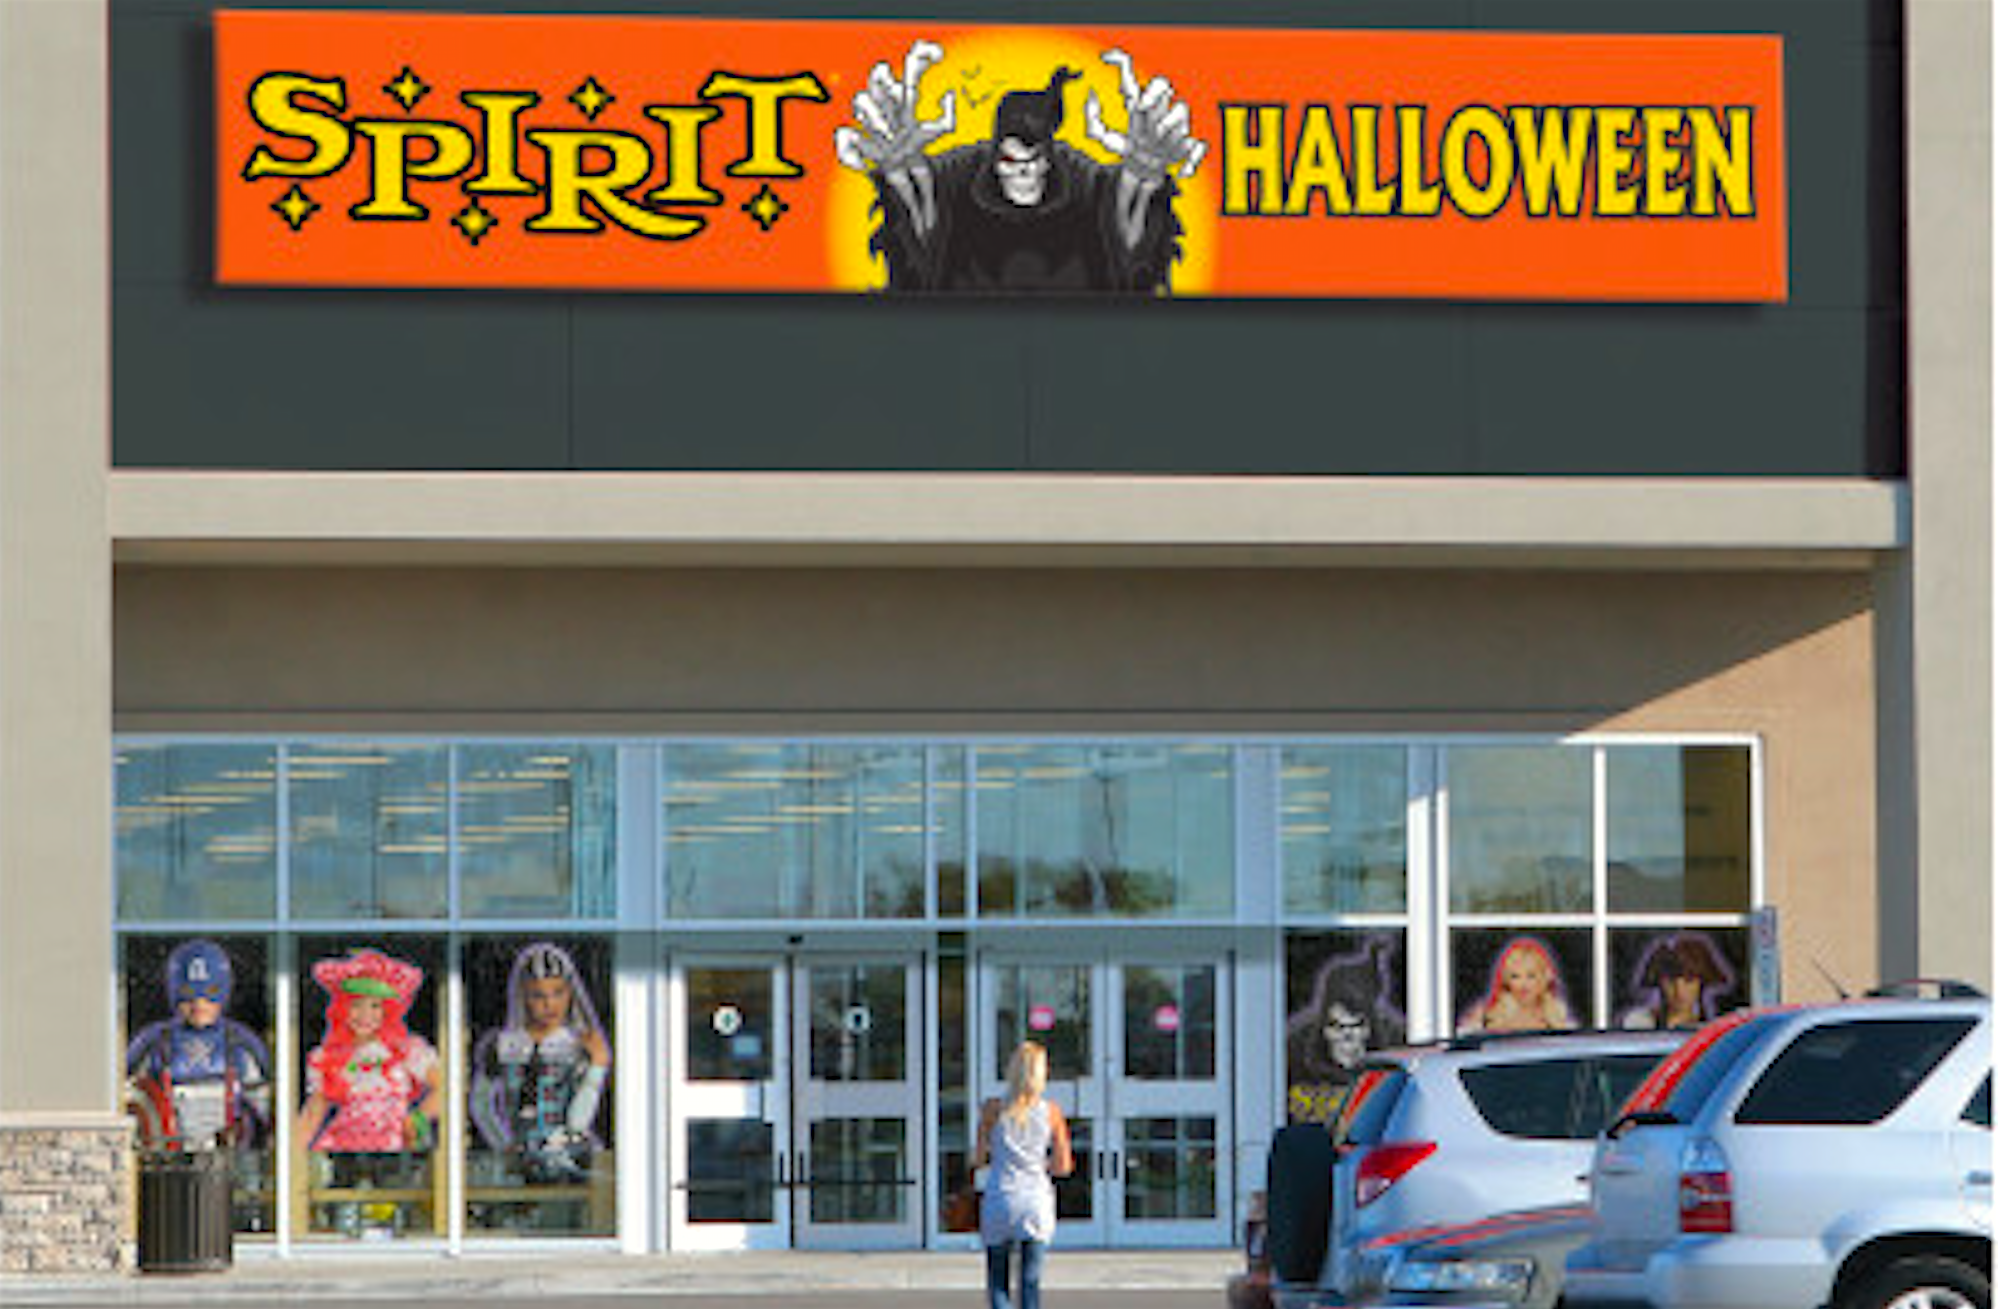 Spirit Halloween stores survive COVID-19 pandemic to spook you - Vancouver Is Awesome